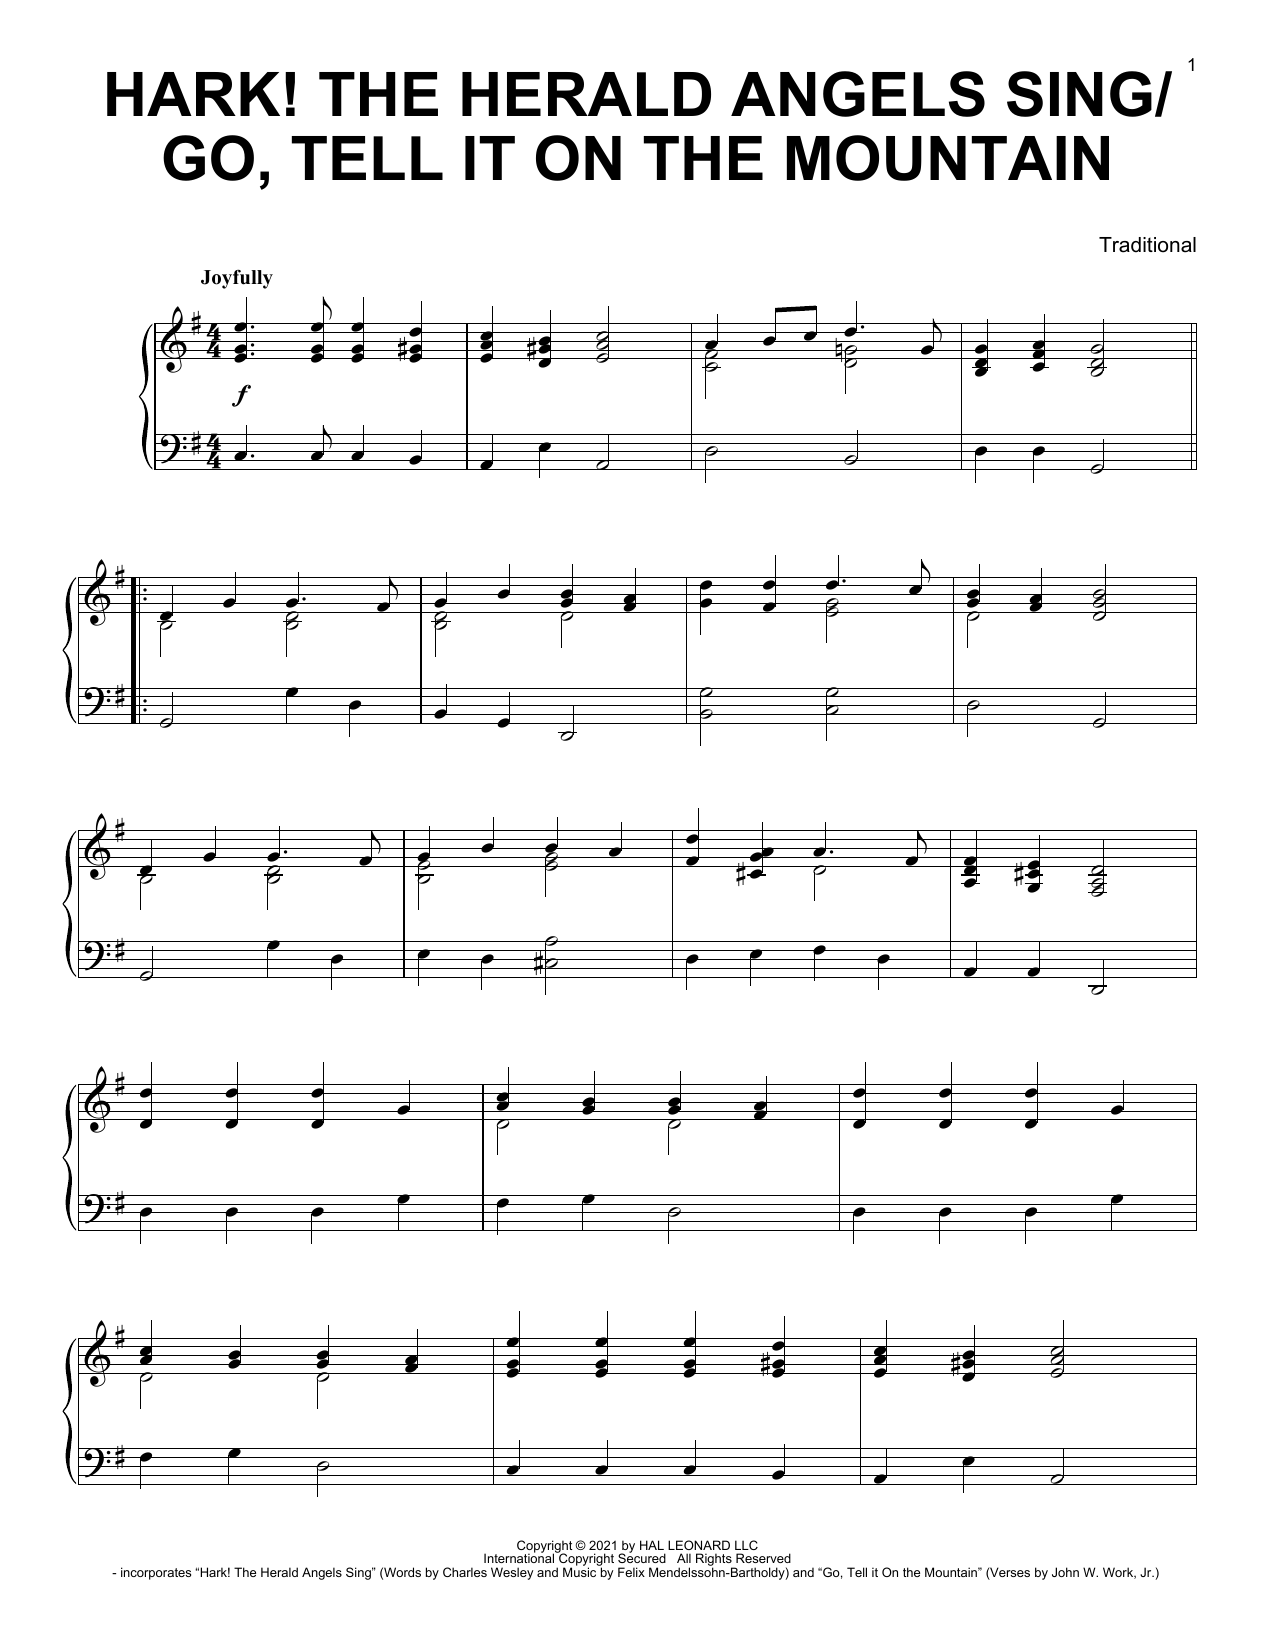 Download Various Hark! The Herald Angels Sing / Go, Tell Sheet Music